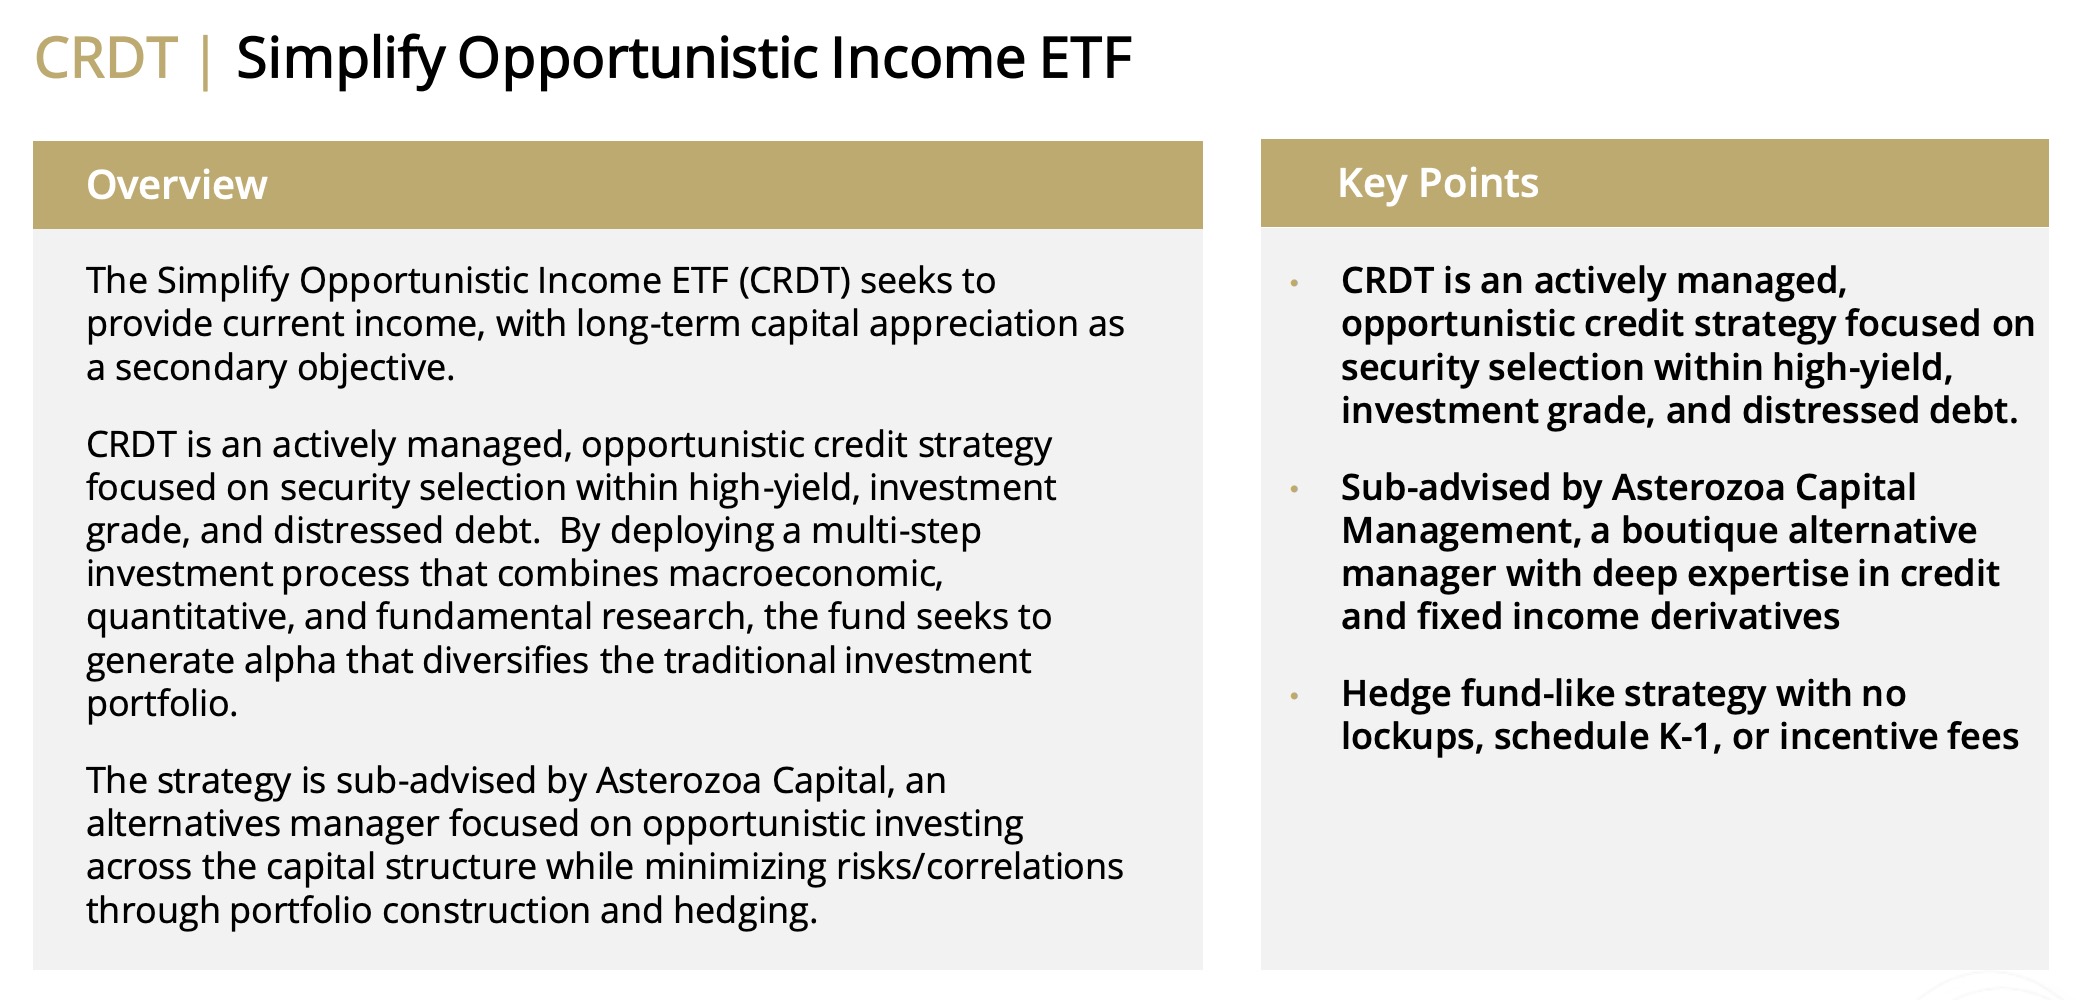 CRDT Simplify Opportunistic Income ETF Overview and Key Points 